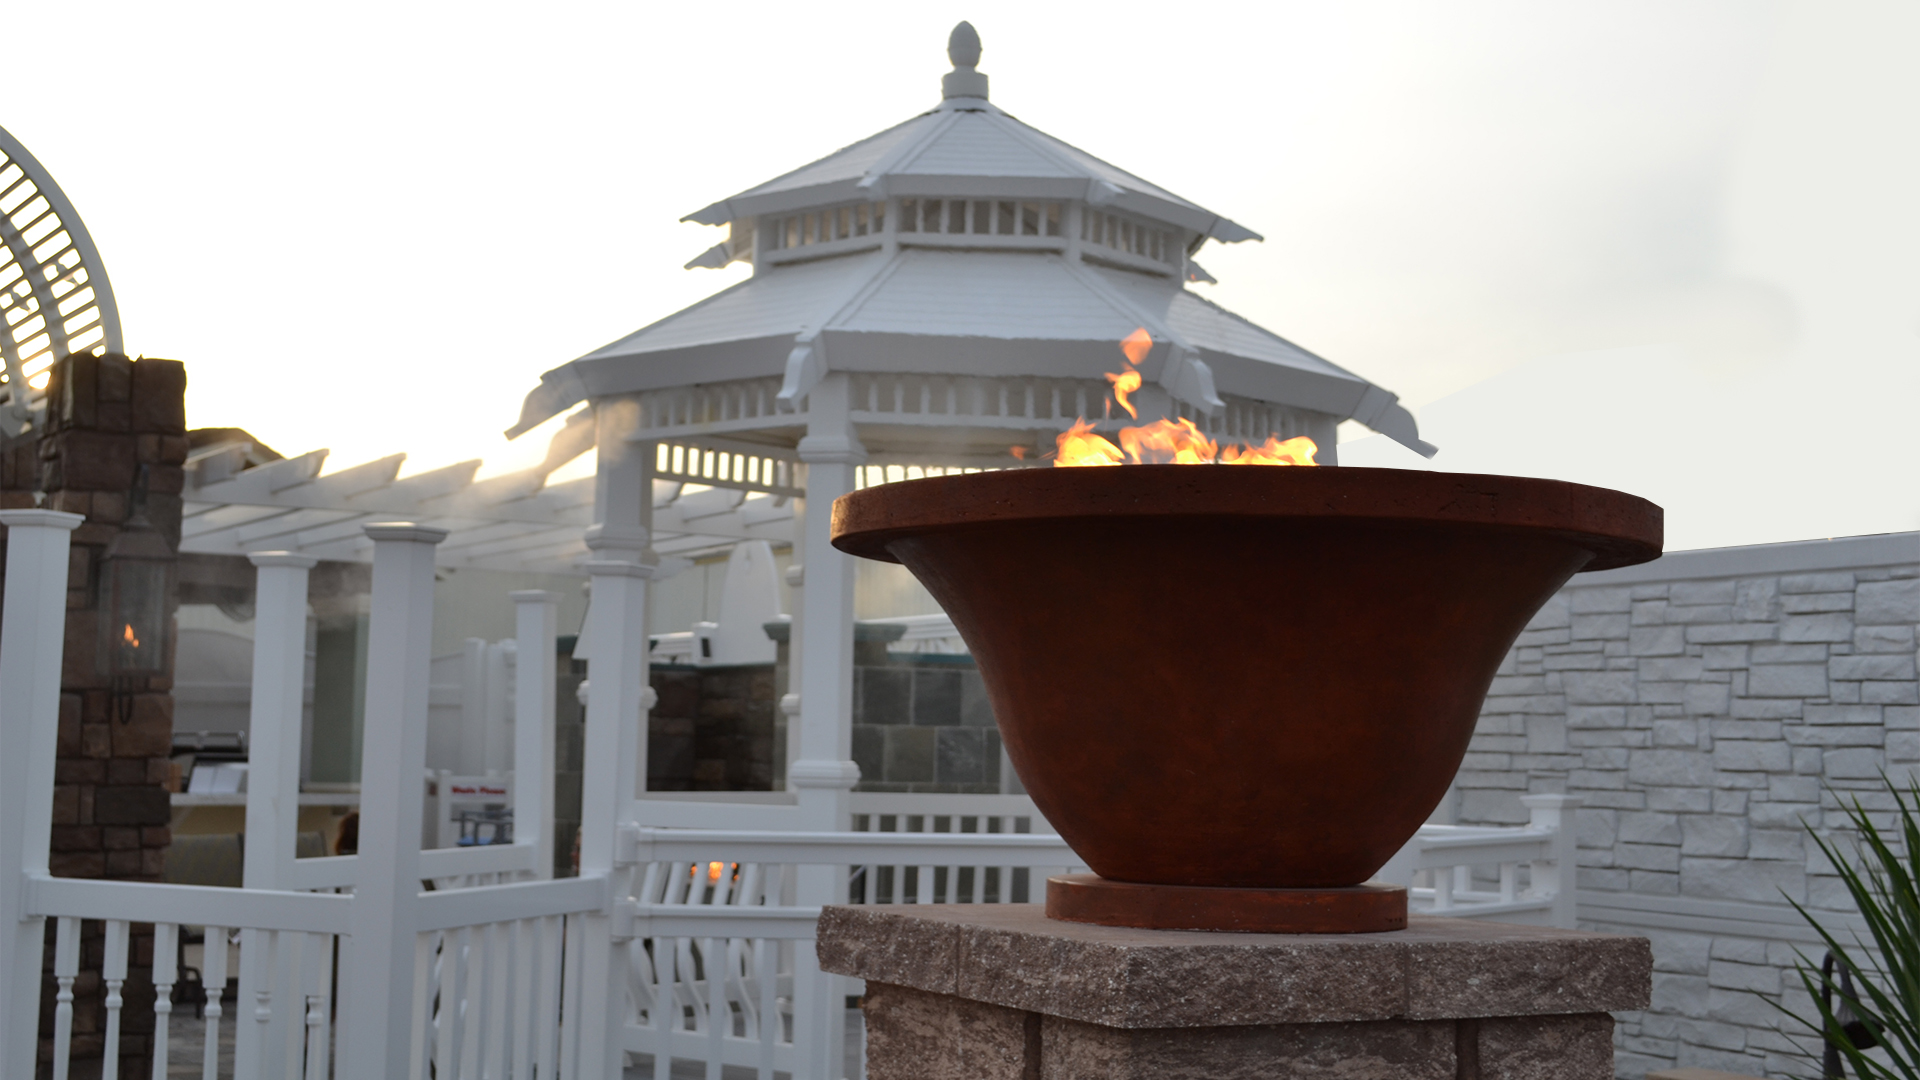 Danielle Fence & Outdoor Living | Danielle Fence Showroom - Fire Bowl